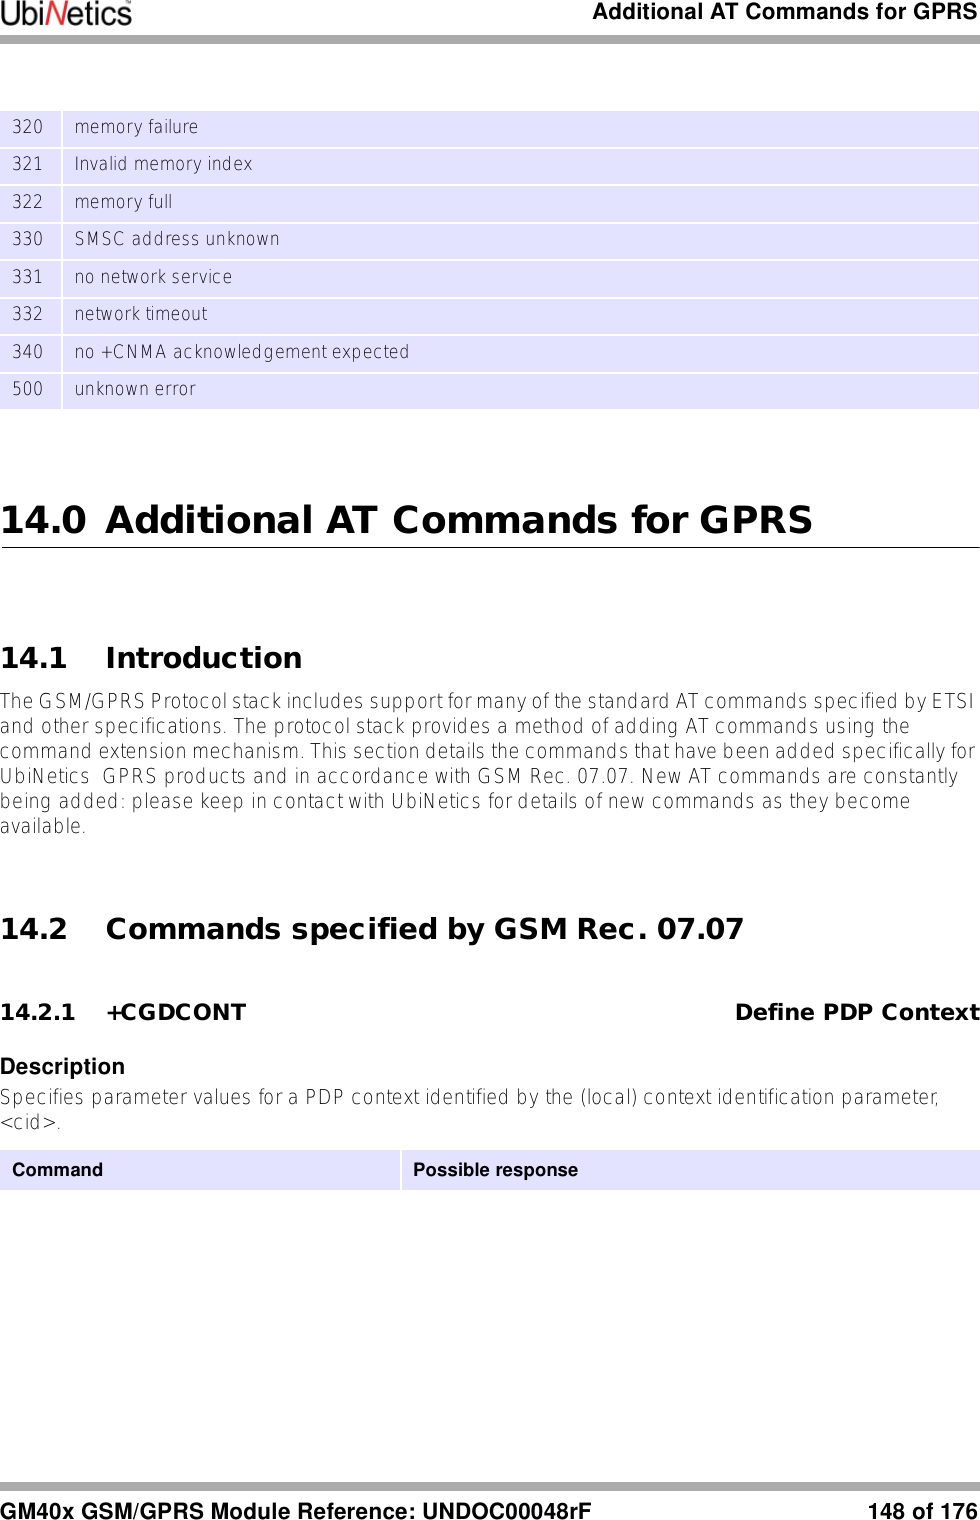 Additional AT Commands for GPRSGM40x GSM/GPRS Module Reference: UNDOC00048rF 148 of 17614.0 Additional AT Commands for GPRS14.1 IntroductionThe GSM/GPRS Protocol stack includes support for many of the standard AT commands specified by ETSI and other specifications. The protocol stack provides a method of adding AT commands using the command extension mechanism. This section details the commands that have been added specifically for UbiNetics  GPRS products and in accordance with GSM Rec. 07.07. New AT commands are constantly being added: please keep in contact with UbiNetics for details of new commands as they become available.14.2 Commands specified by GSM Rec. 07.0714.2.1 +CGDCONT Define PDP ContextDescriptionSpecifies parameter values for a PDP context identified by the (local) context identification parameter, &lt;cid&gt;. 320  memory failure321  Invalid memory index322  memory full330  SMSC address unknown331  no network service332  network timeout340  no +CNMA acknowledgement expected500  unknown errorCommand  Possible response